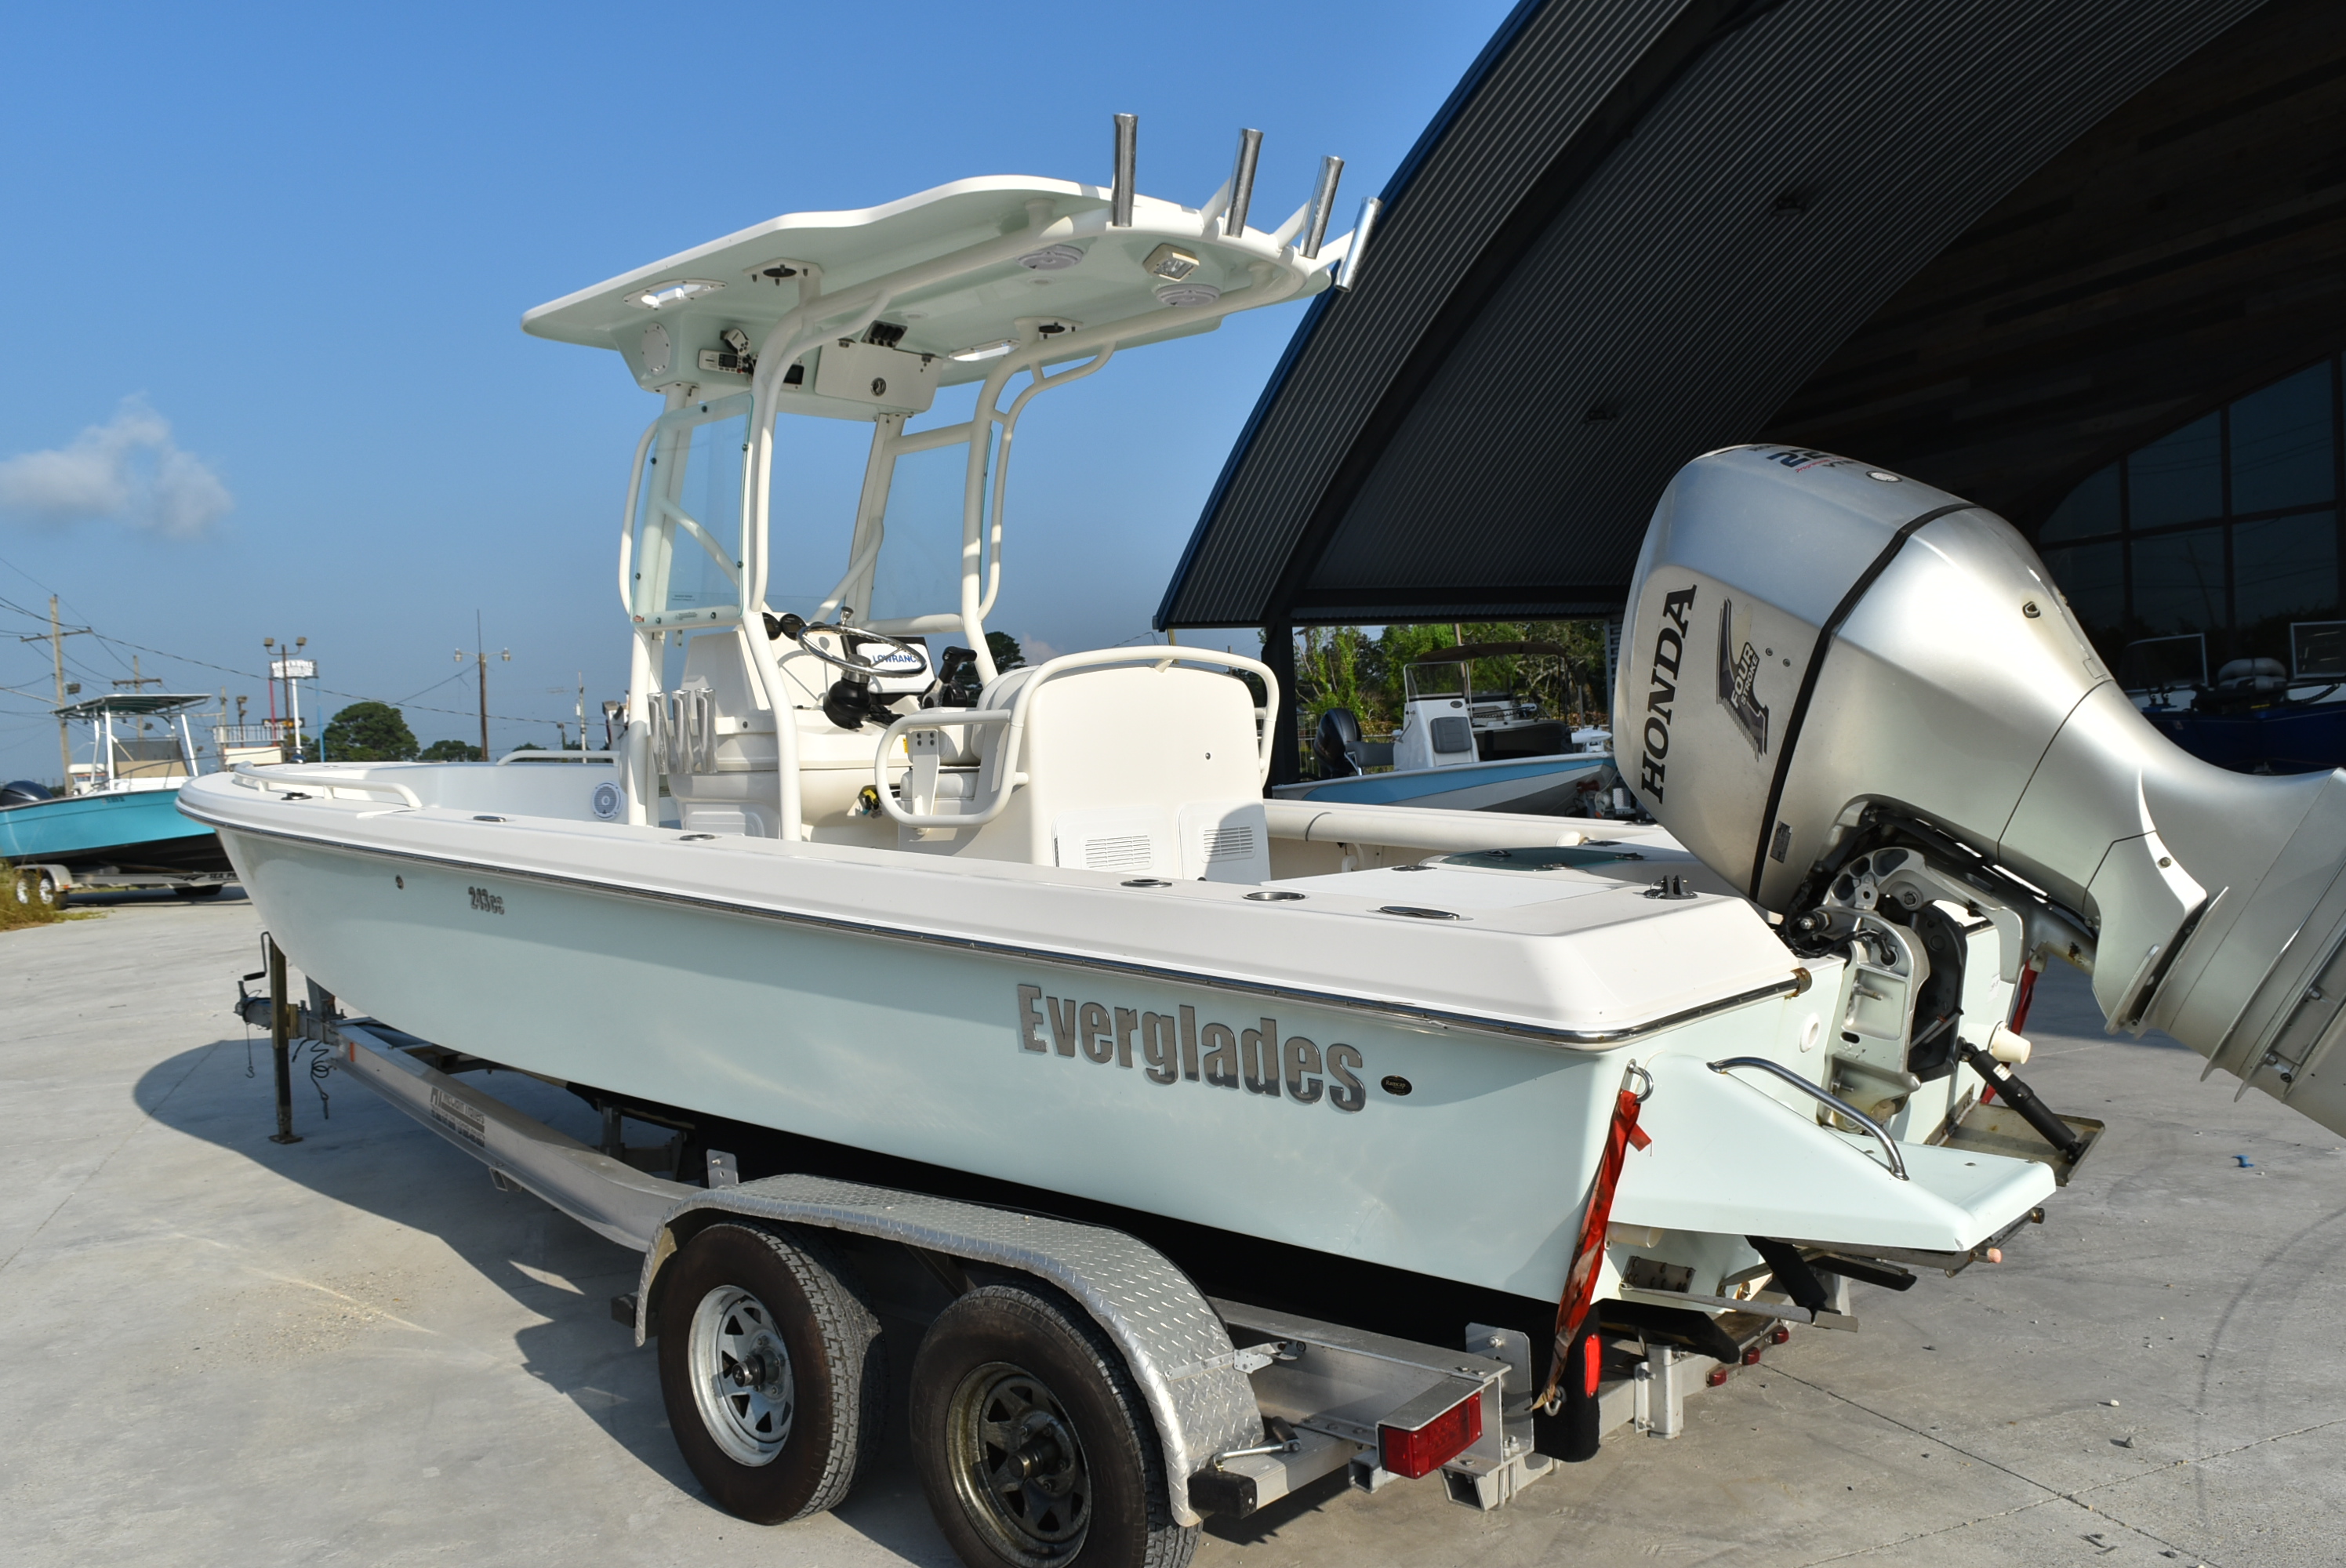 2007 Everglades boat for sale, model of the boat is 243 CC & Image # 11 of 15